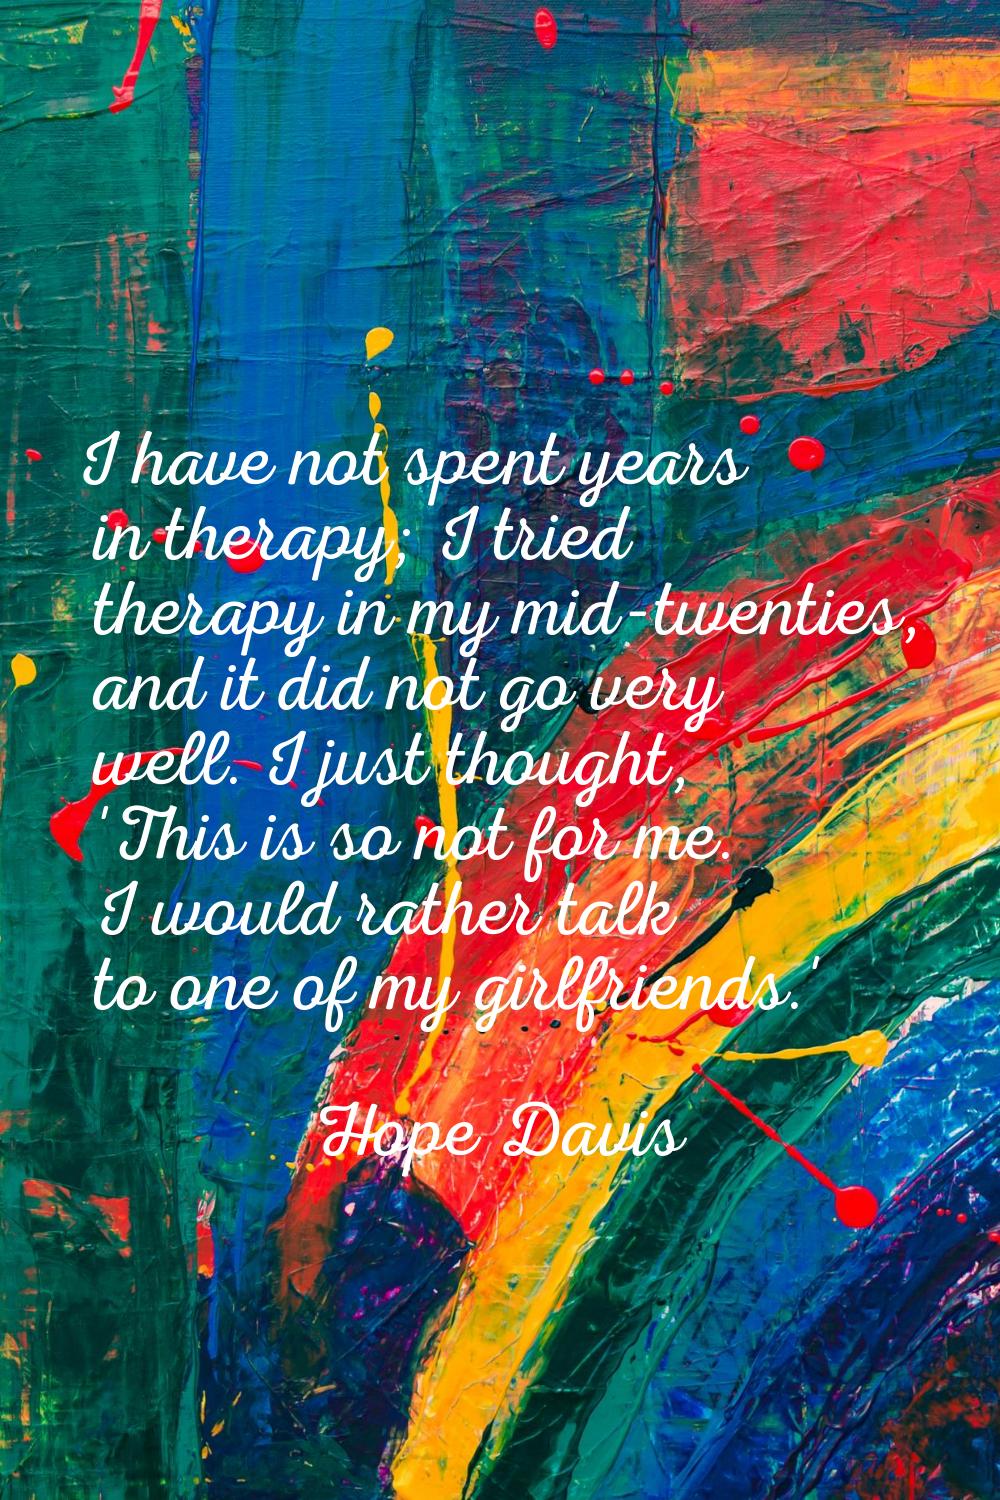 I have not spent years in therapy; I tried therapy in my mid-twenties, and it did not go very well.